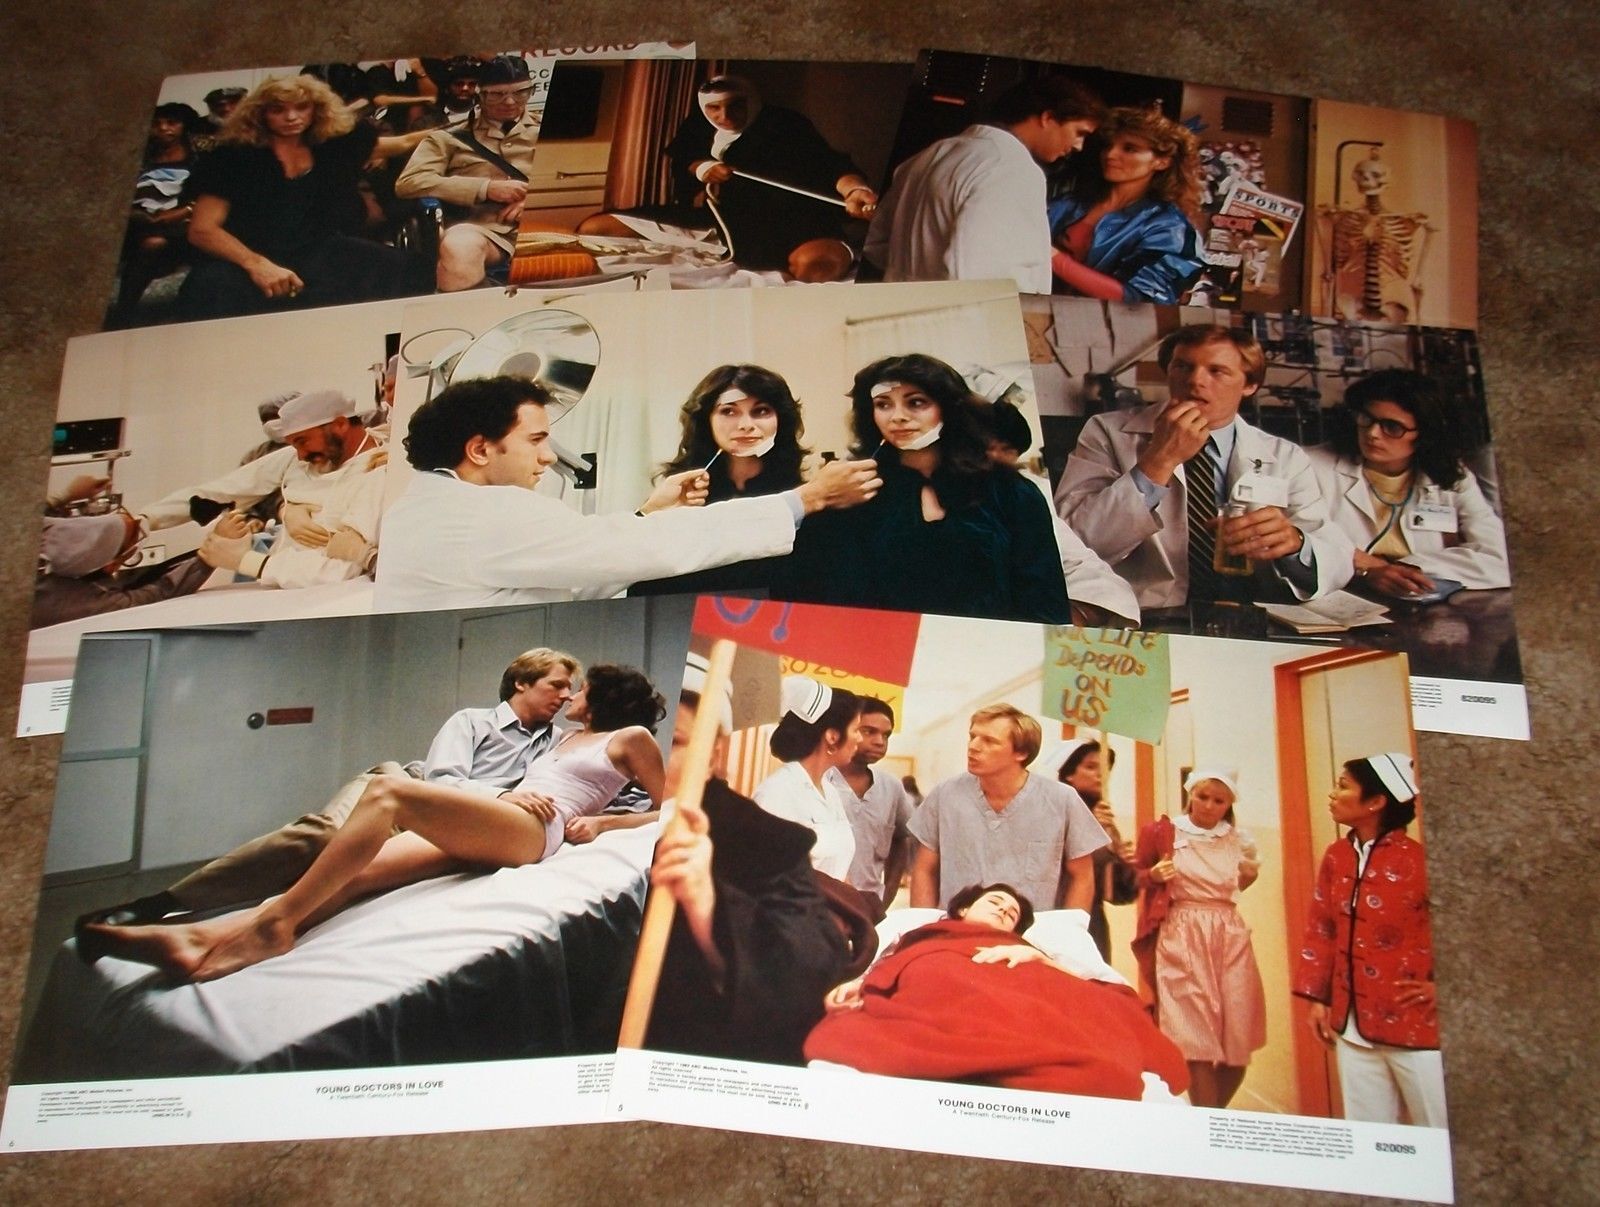 YOUNG DOCTORS IN LOVE Sean Young 1982 Original 8 LOBBY CARD SET 11 x 14 MINT 2 